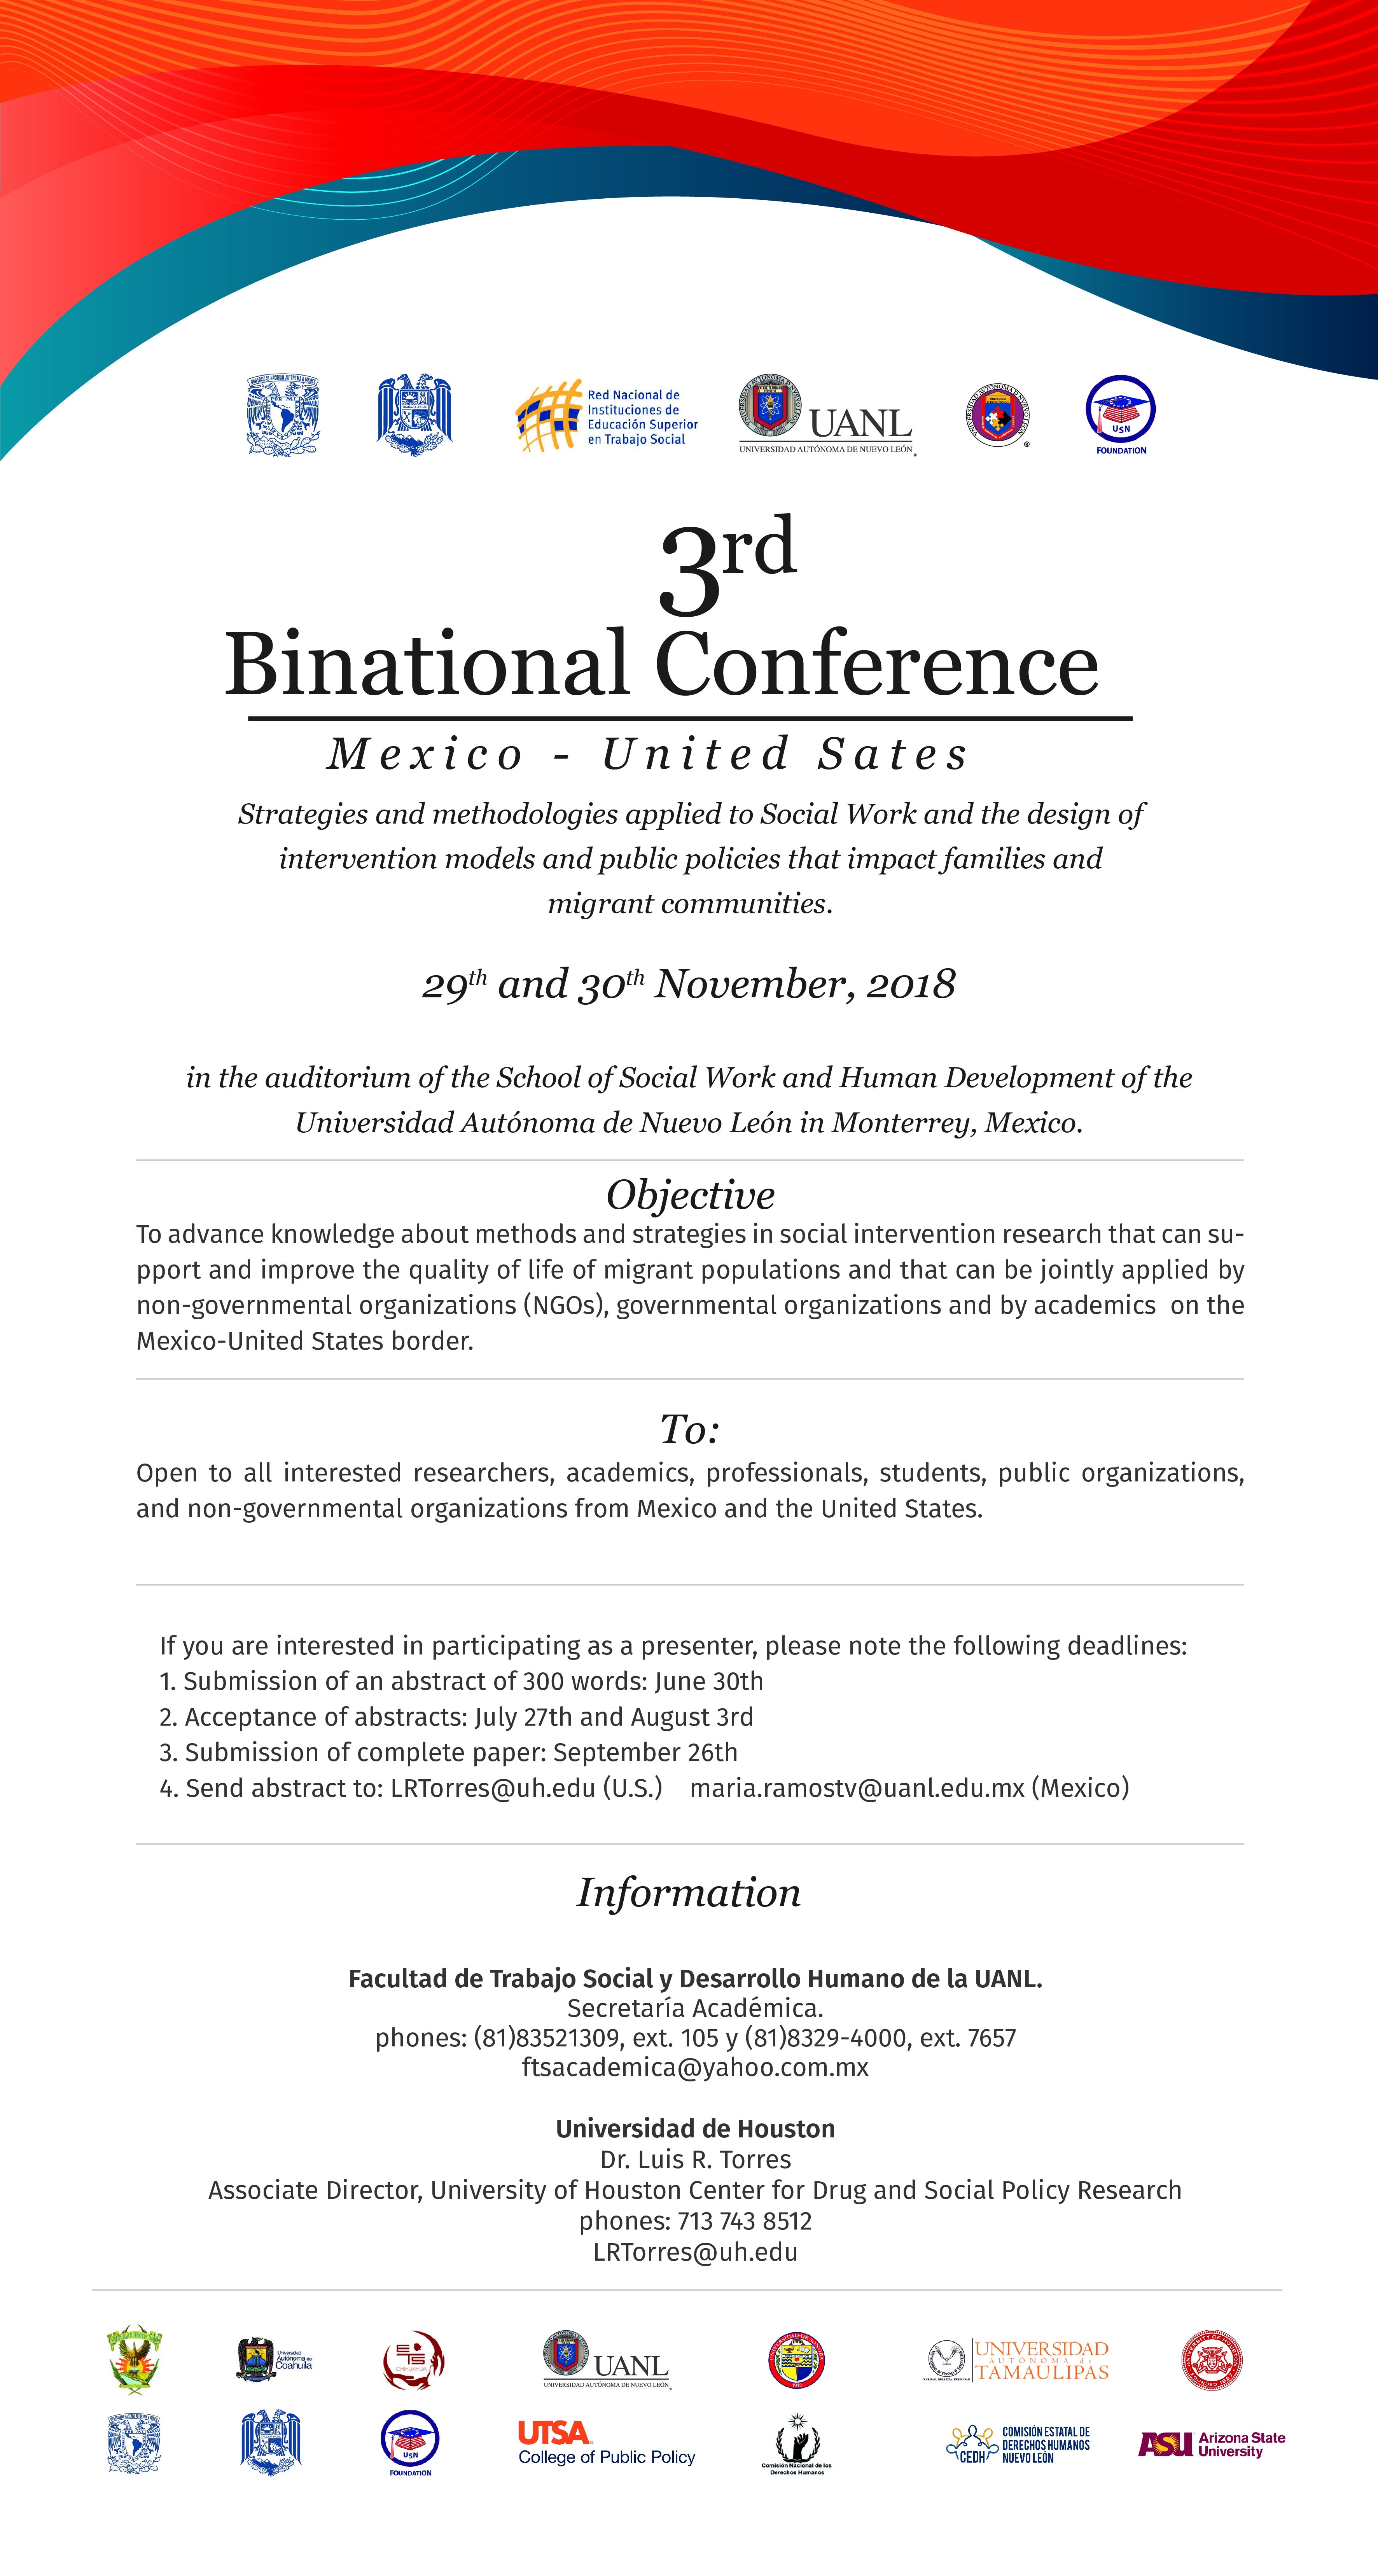 3rd Binational Conference, Mexico - US